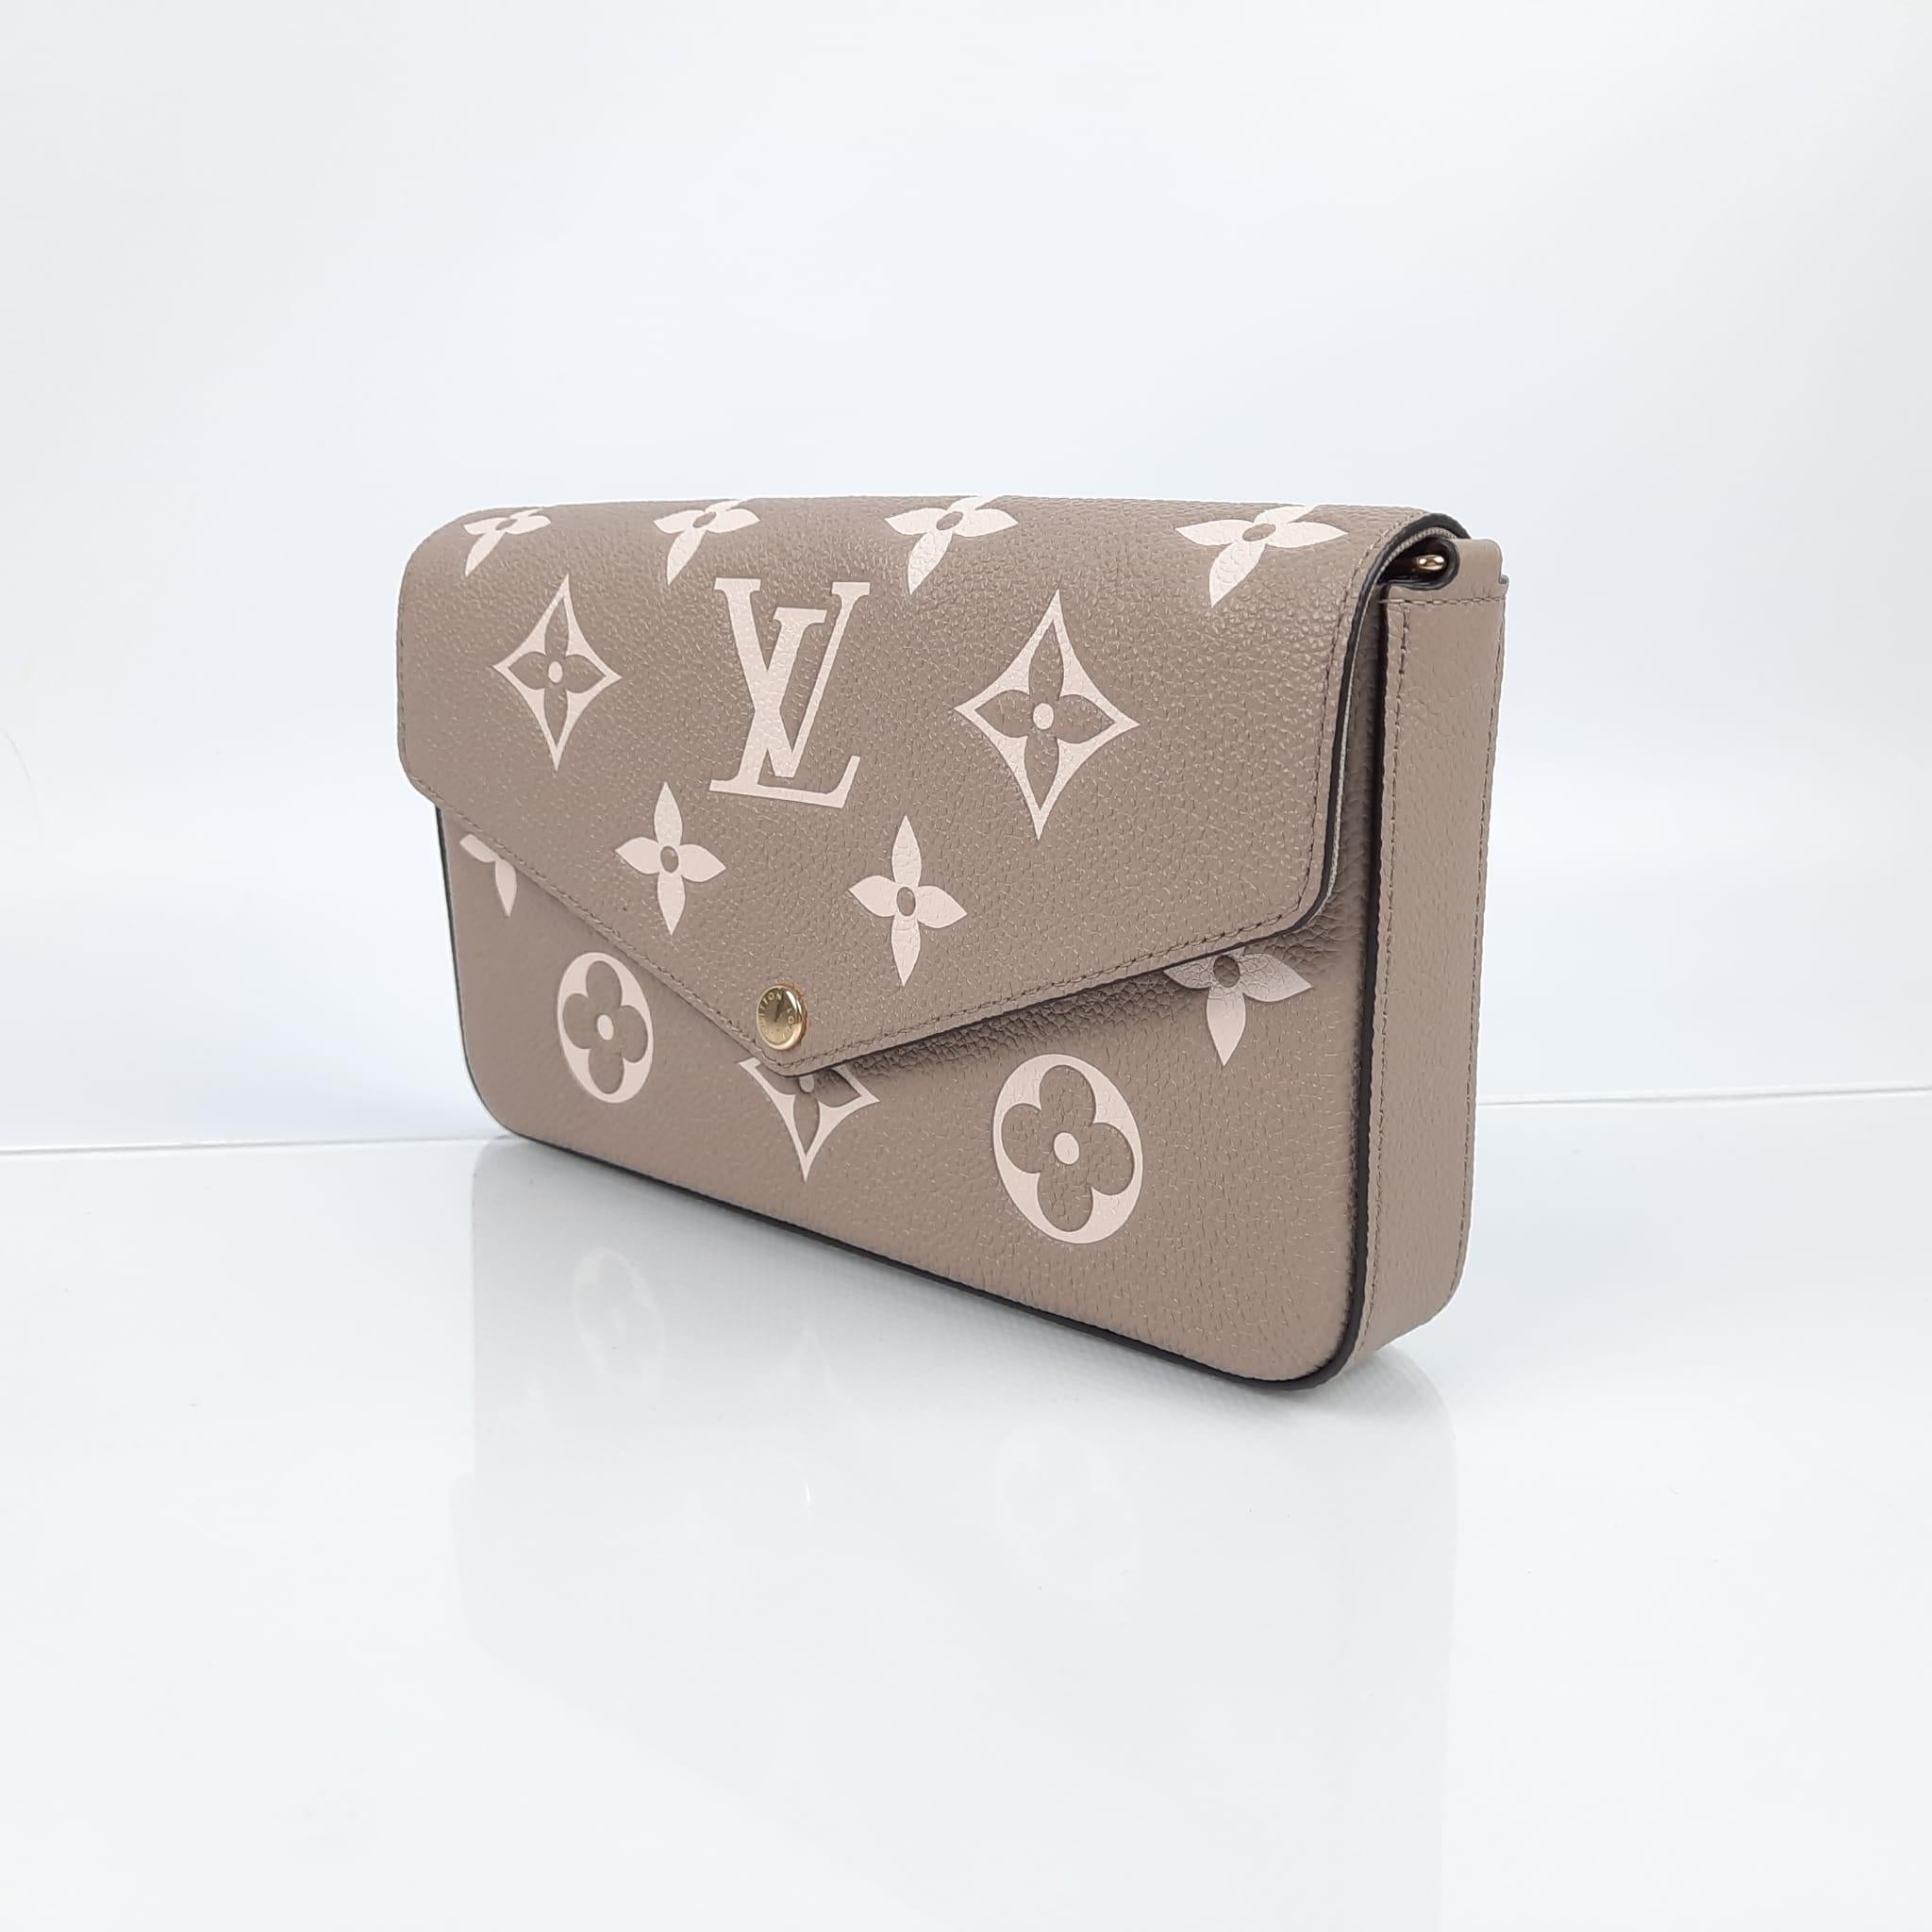 Tourterelle Grey/Cream
Monogram Empreinte embossed supple grained cowhide leather
Textile lining
Gold-colour hardware
Removable metallic chain for shoulder or cross-body carry 
Press stud closure
Large compartment
Inside flat pocket
Removable zipped